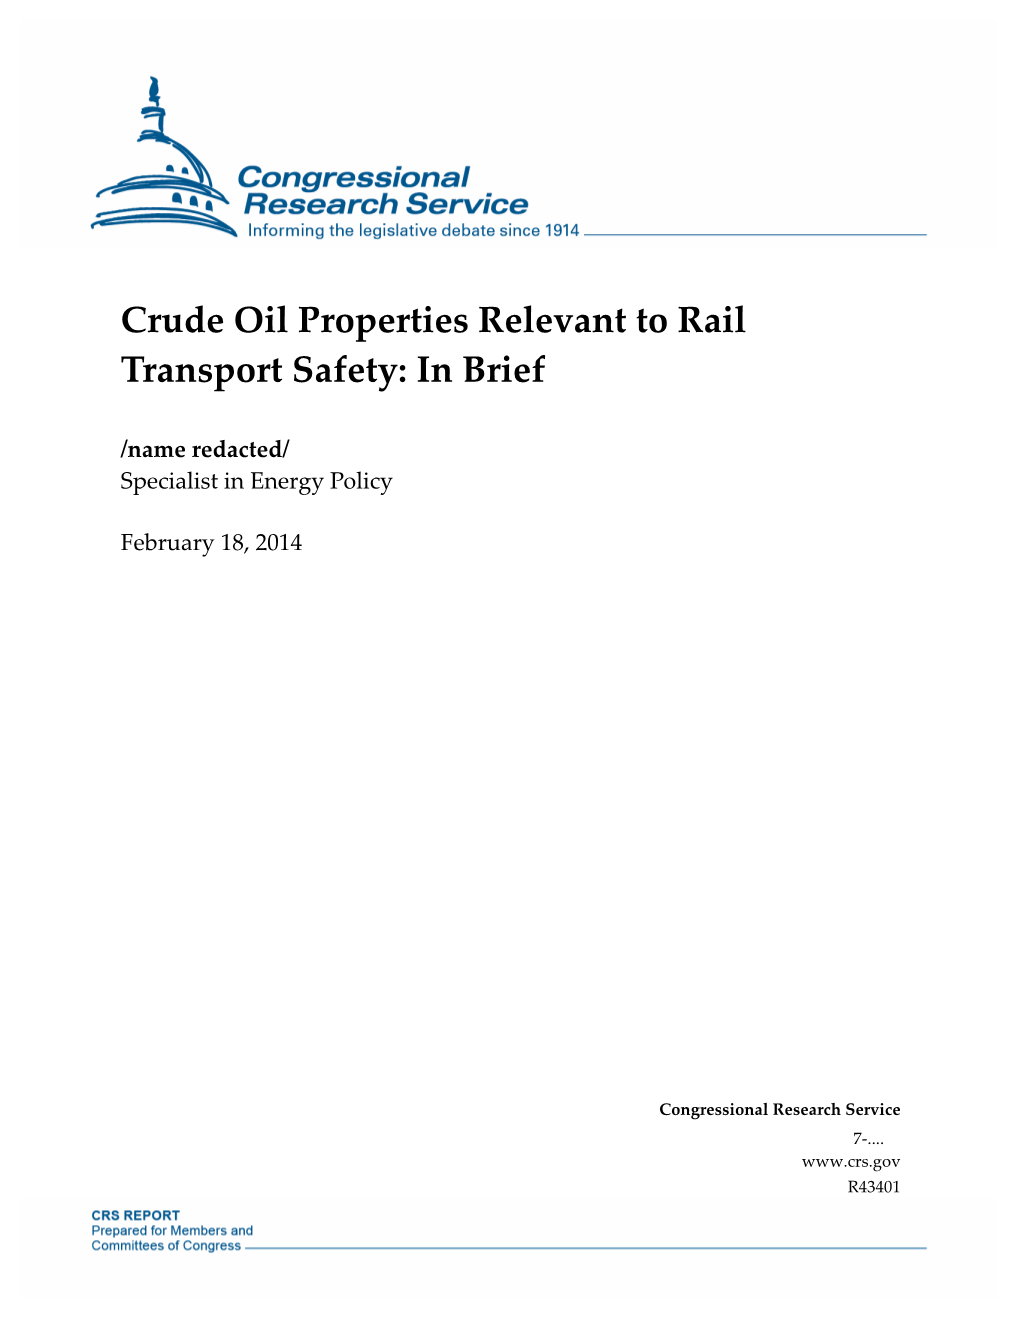 Crude Oil Properties Relevant to Rail Transport Safety: in Brief